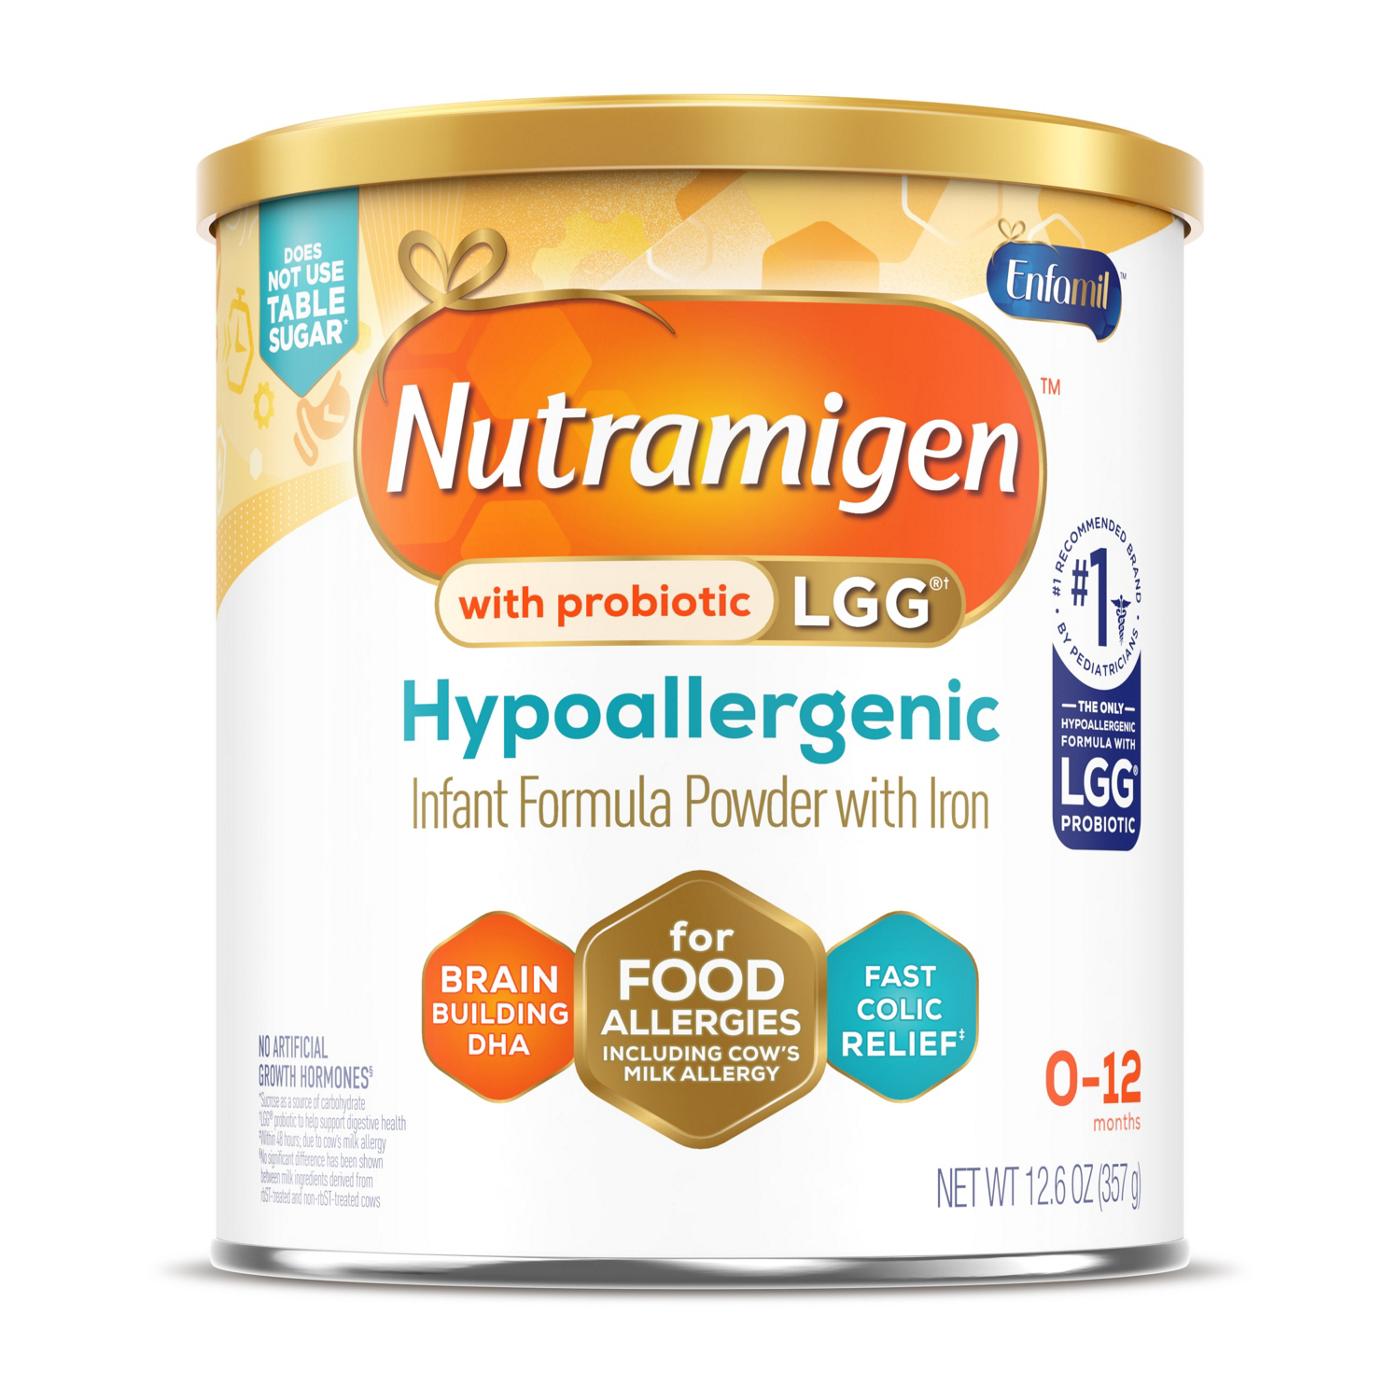 Nutramigen Hypoallergenic Powder Infant Formula with Iron; image 1 of 9